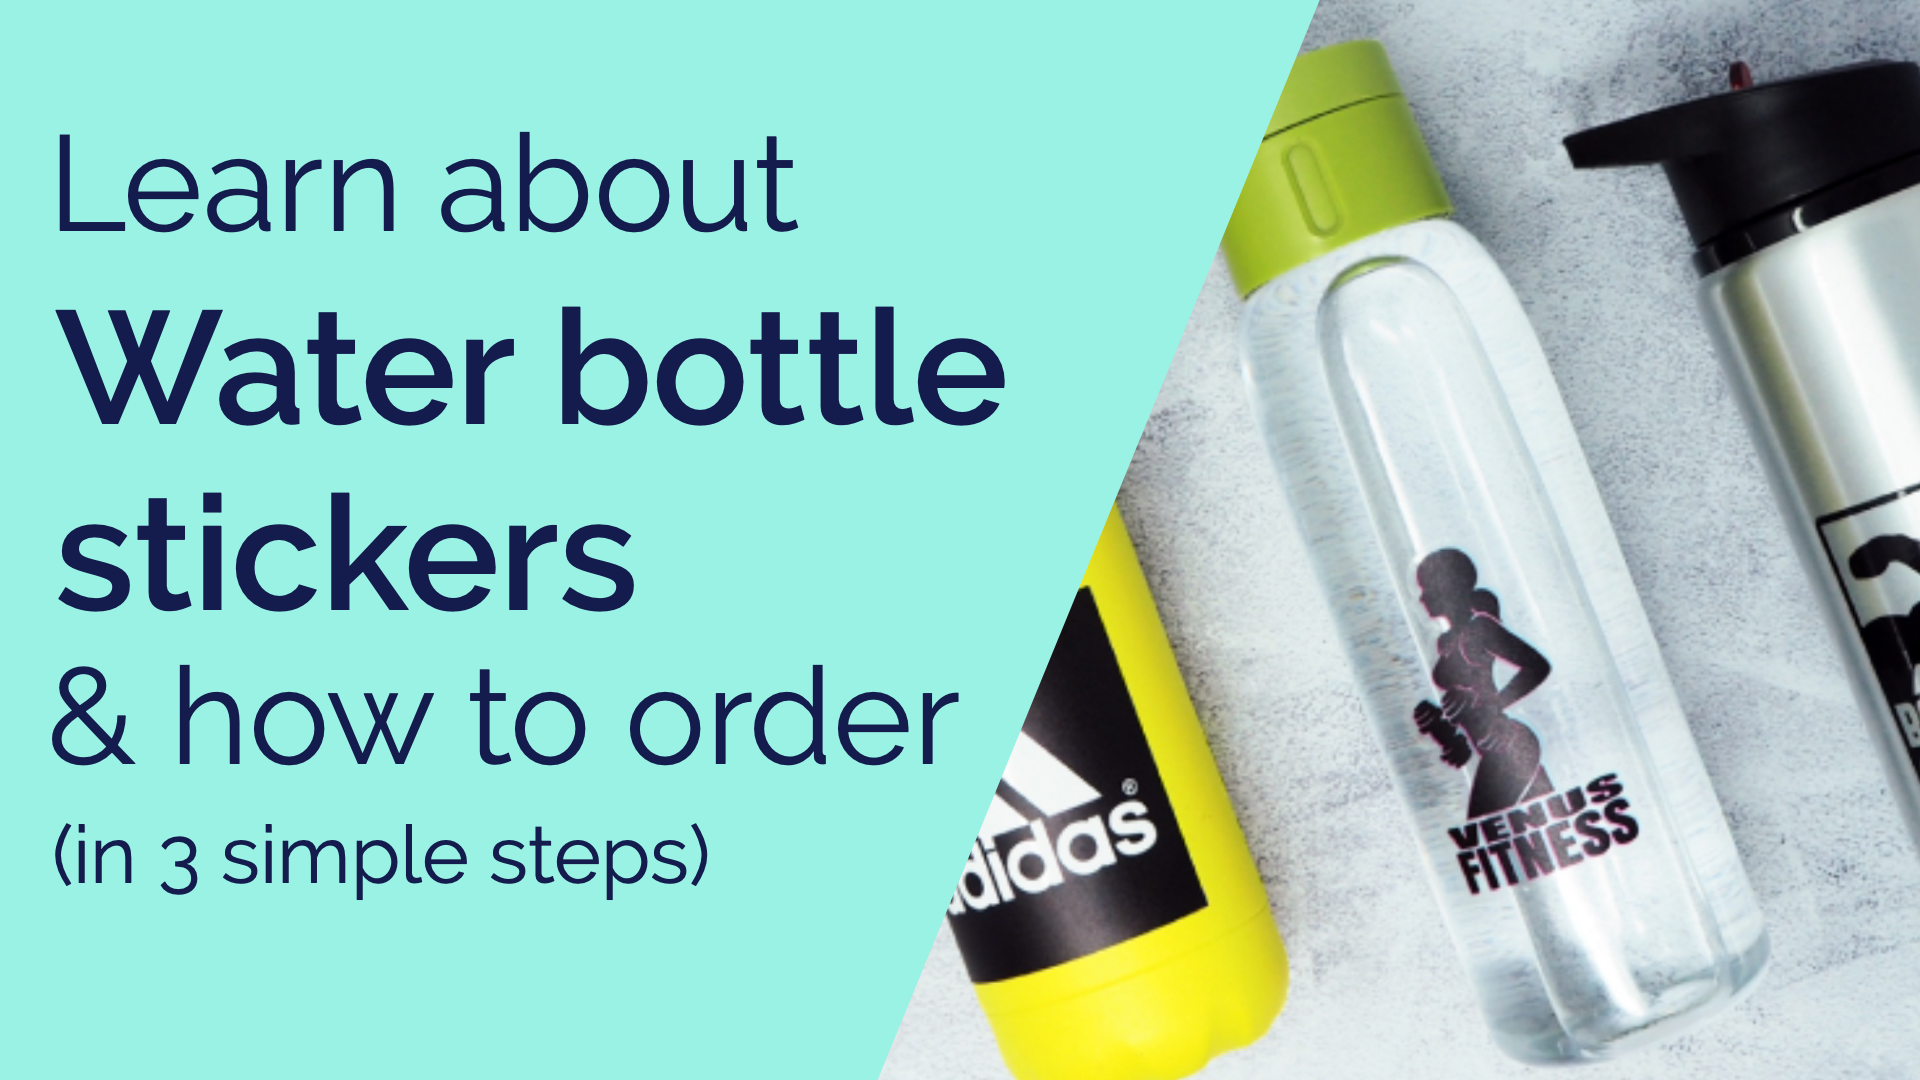 Video laden: A video explaining what water bottle stickers are and how to order them